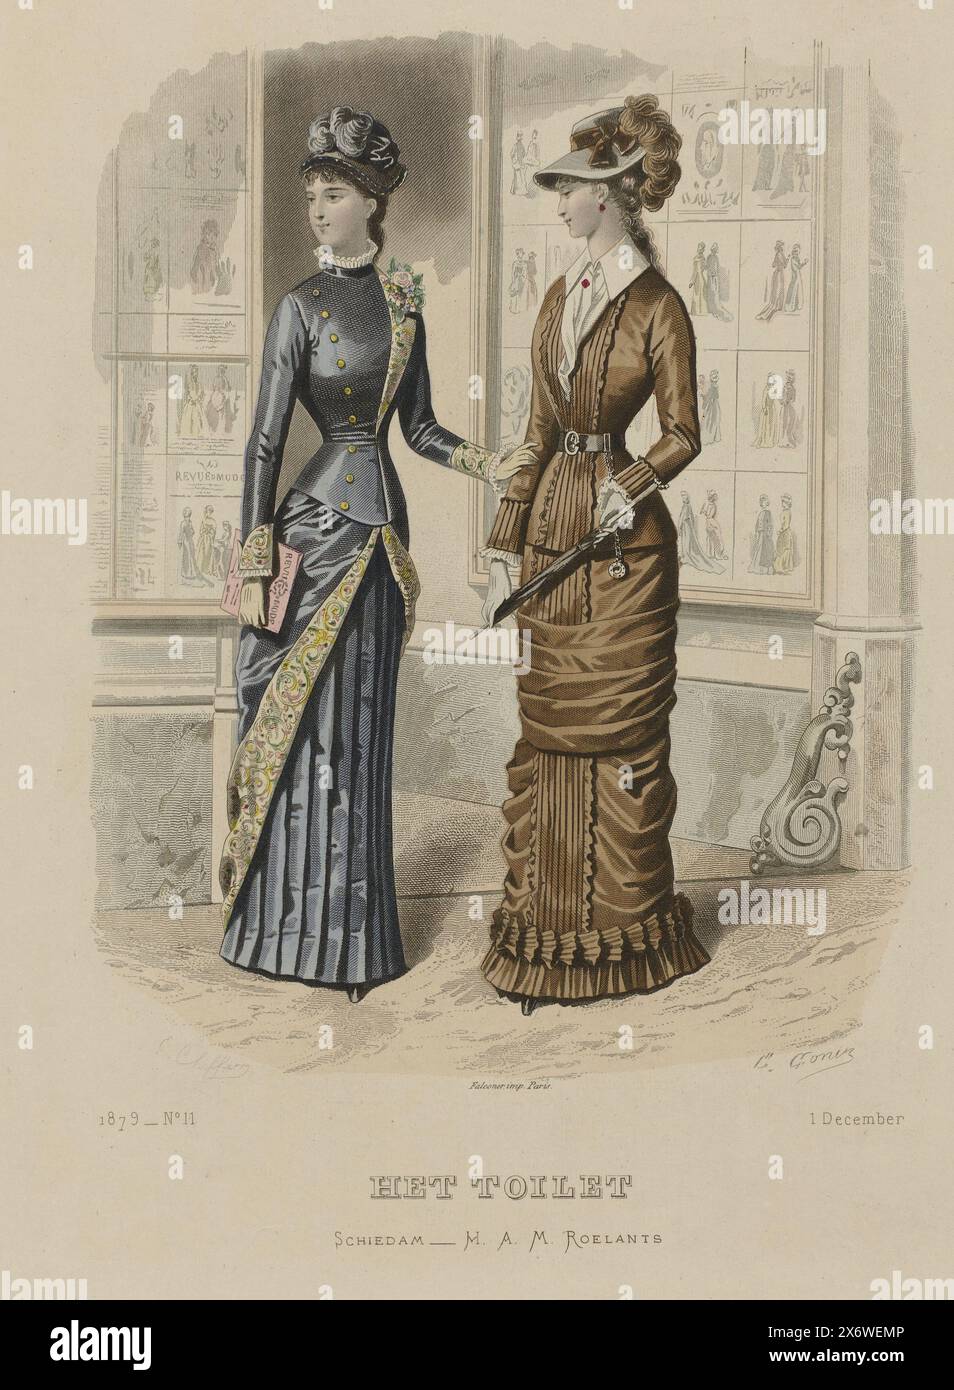 Shopping, The Toilet, December 1, 1879, No. 11, Two women in walking costumes in front of a fabric store with a window full of fashion prints. Print from the fashion magazine Het Toilet (1877-?)., print maker: E. Cheffer, (mentioned on object), after design by: Guido Gonin, (mentioned on object), publisher: Hendrik Adriaan Marius Roelants, (mentioned on object), publisher: Schiedam, printer: Paris, 1879, paper, engraving, height c. 363 mm × width c. 262 mm Stock Photo